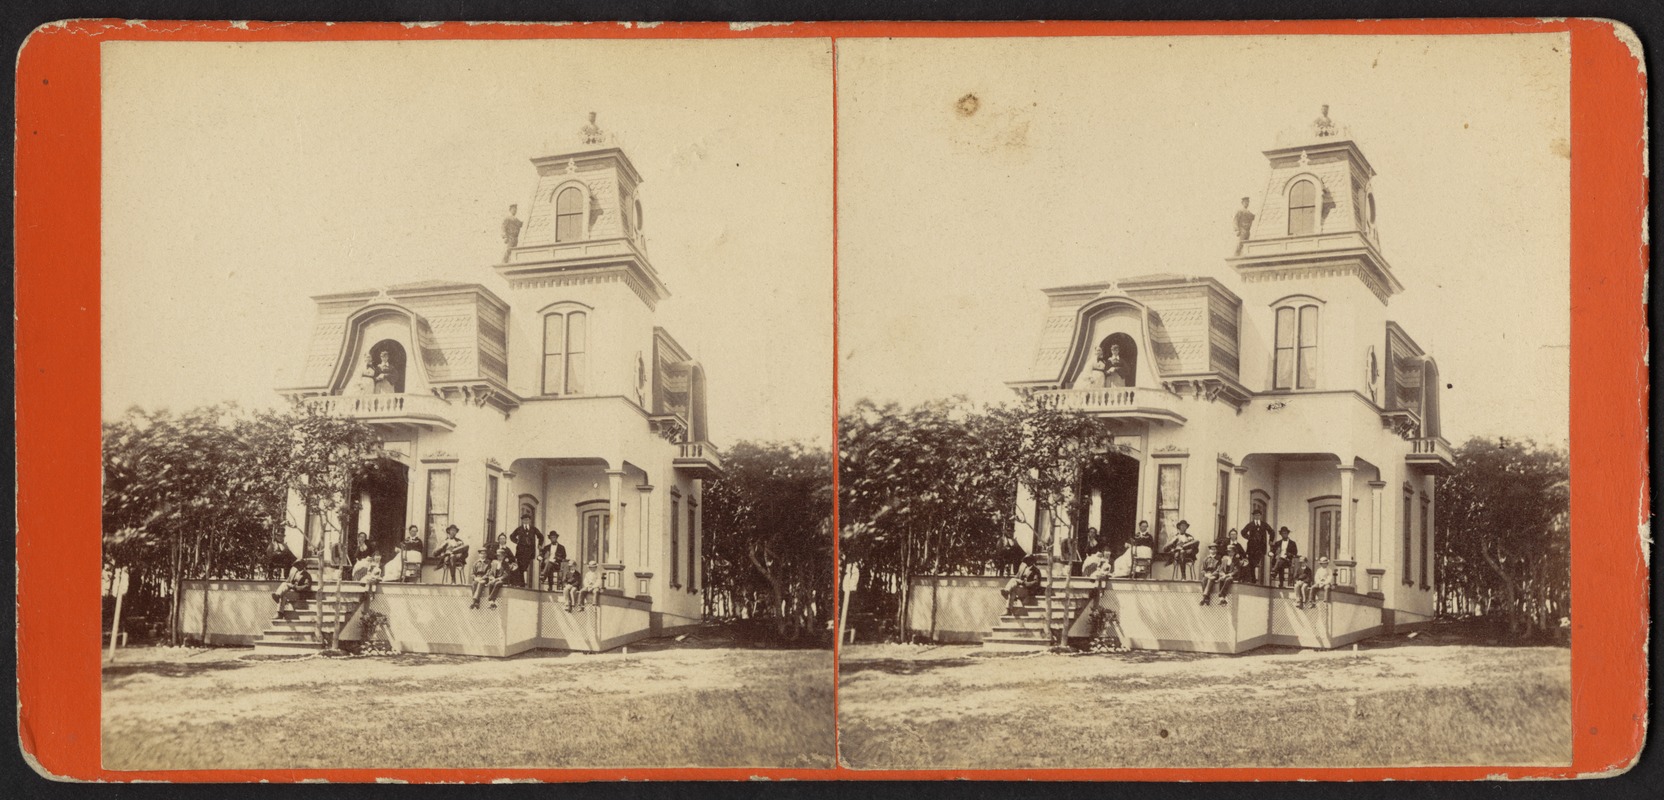 Photograph of people on the steps, porch, balcony, ledge, and roof of a house